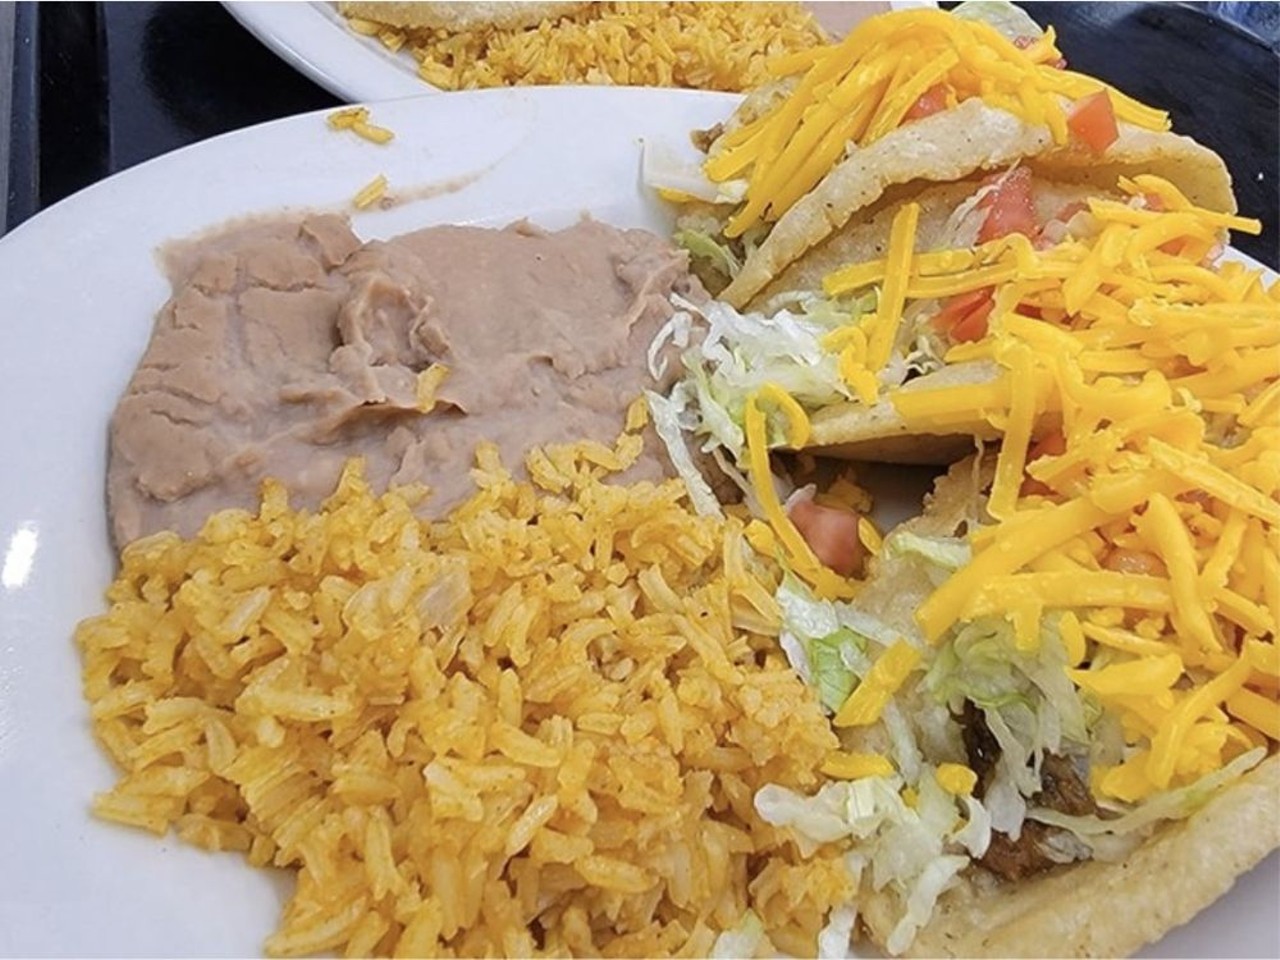 Puffy tacos were actually invented in California.